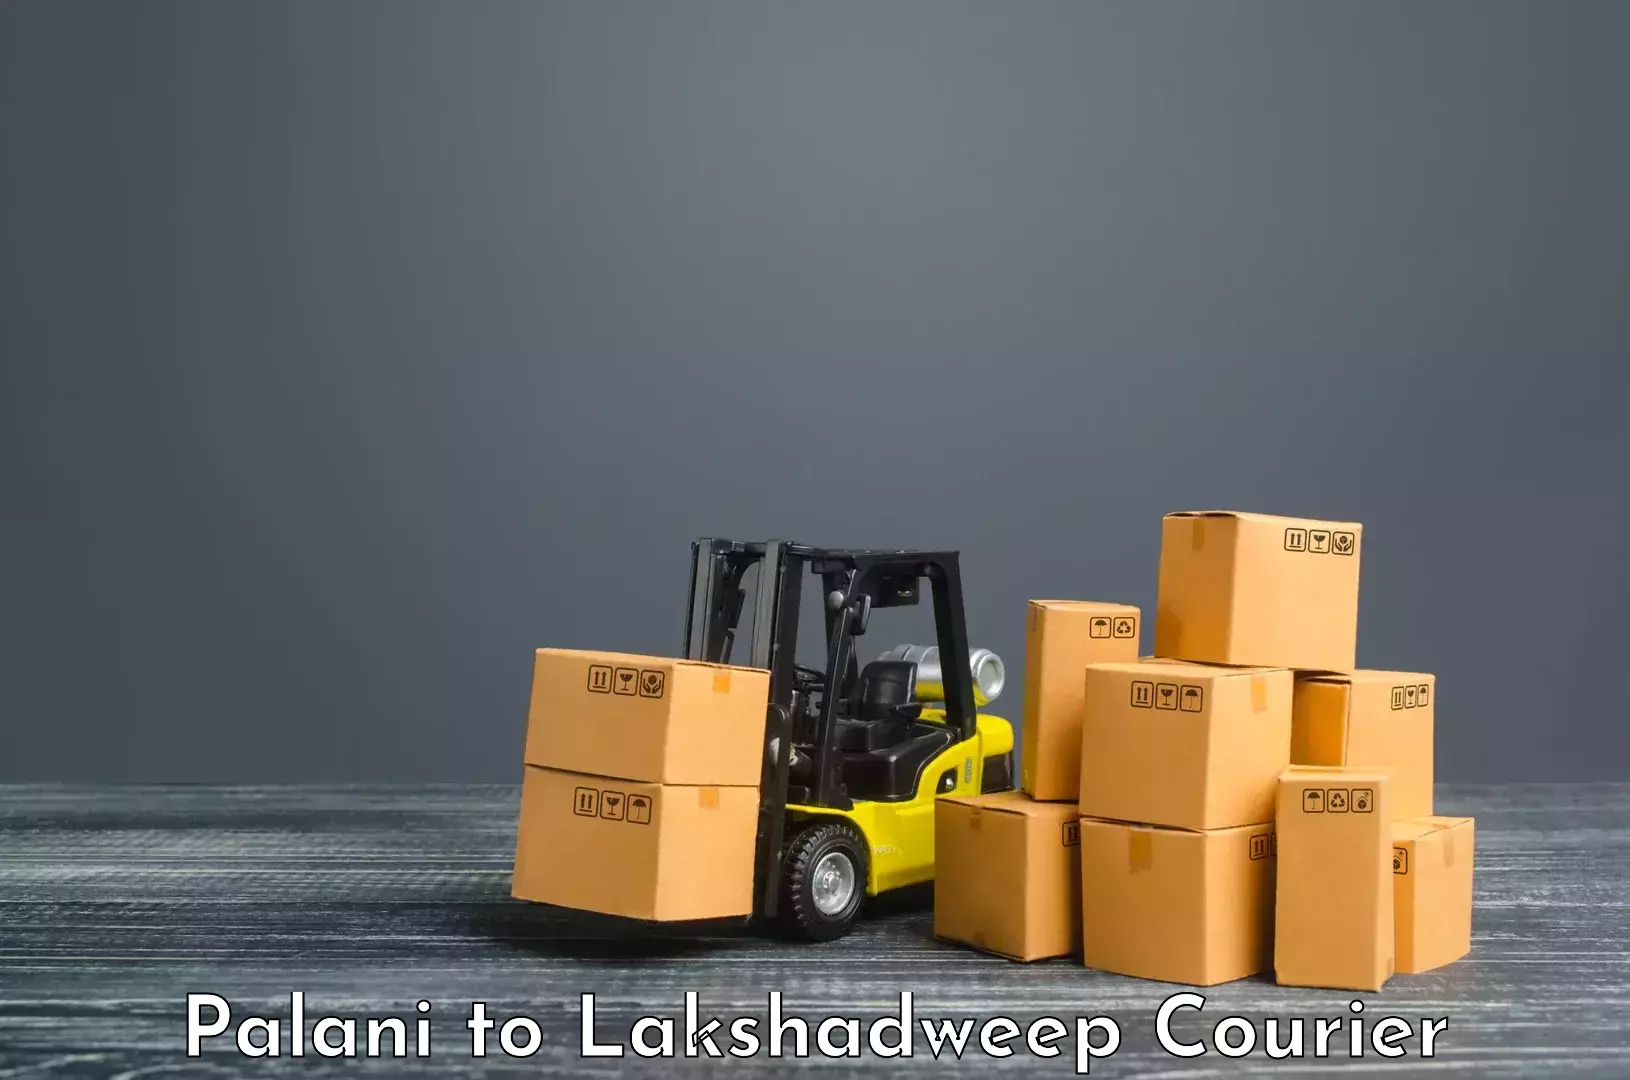 Multi-national courier services Palani to Lakshadweep